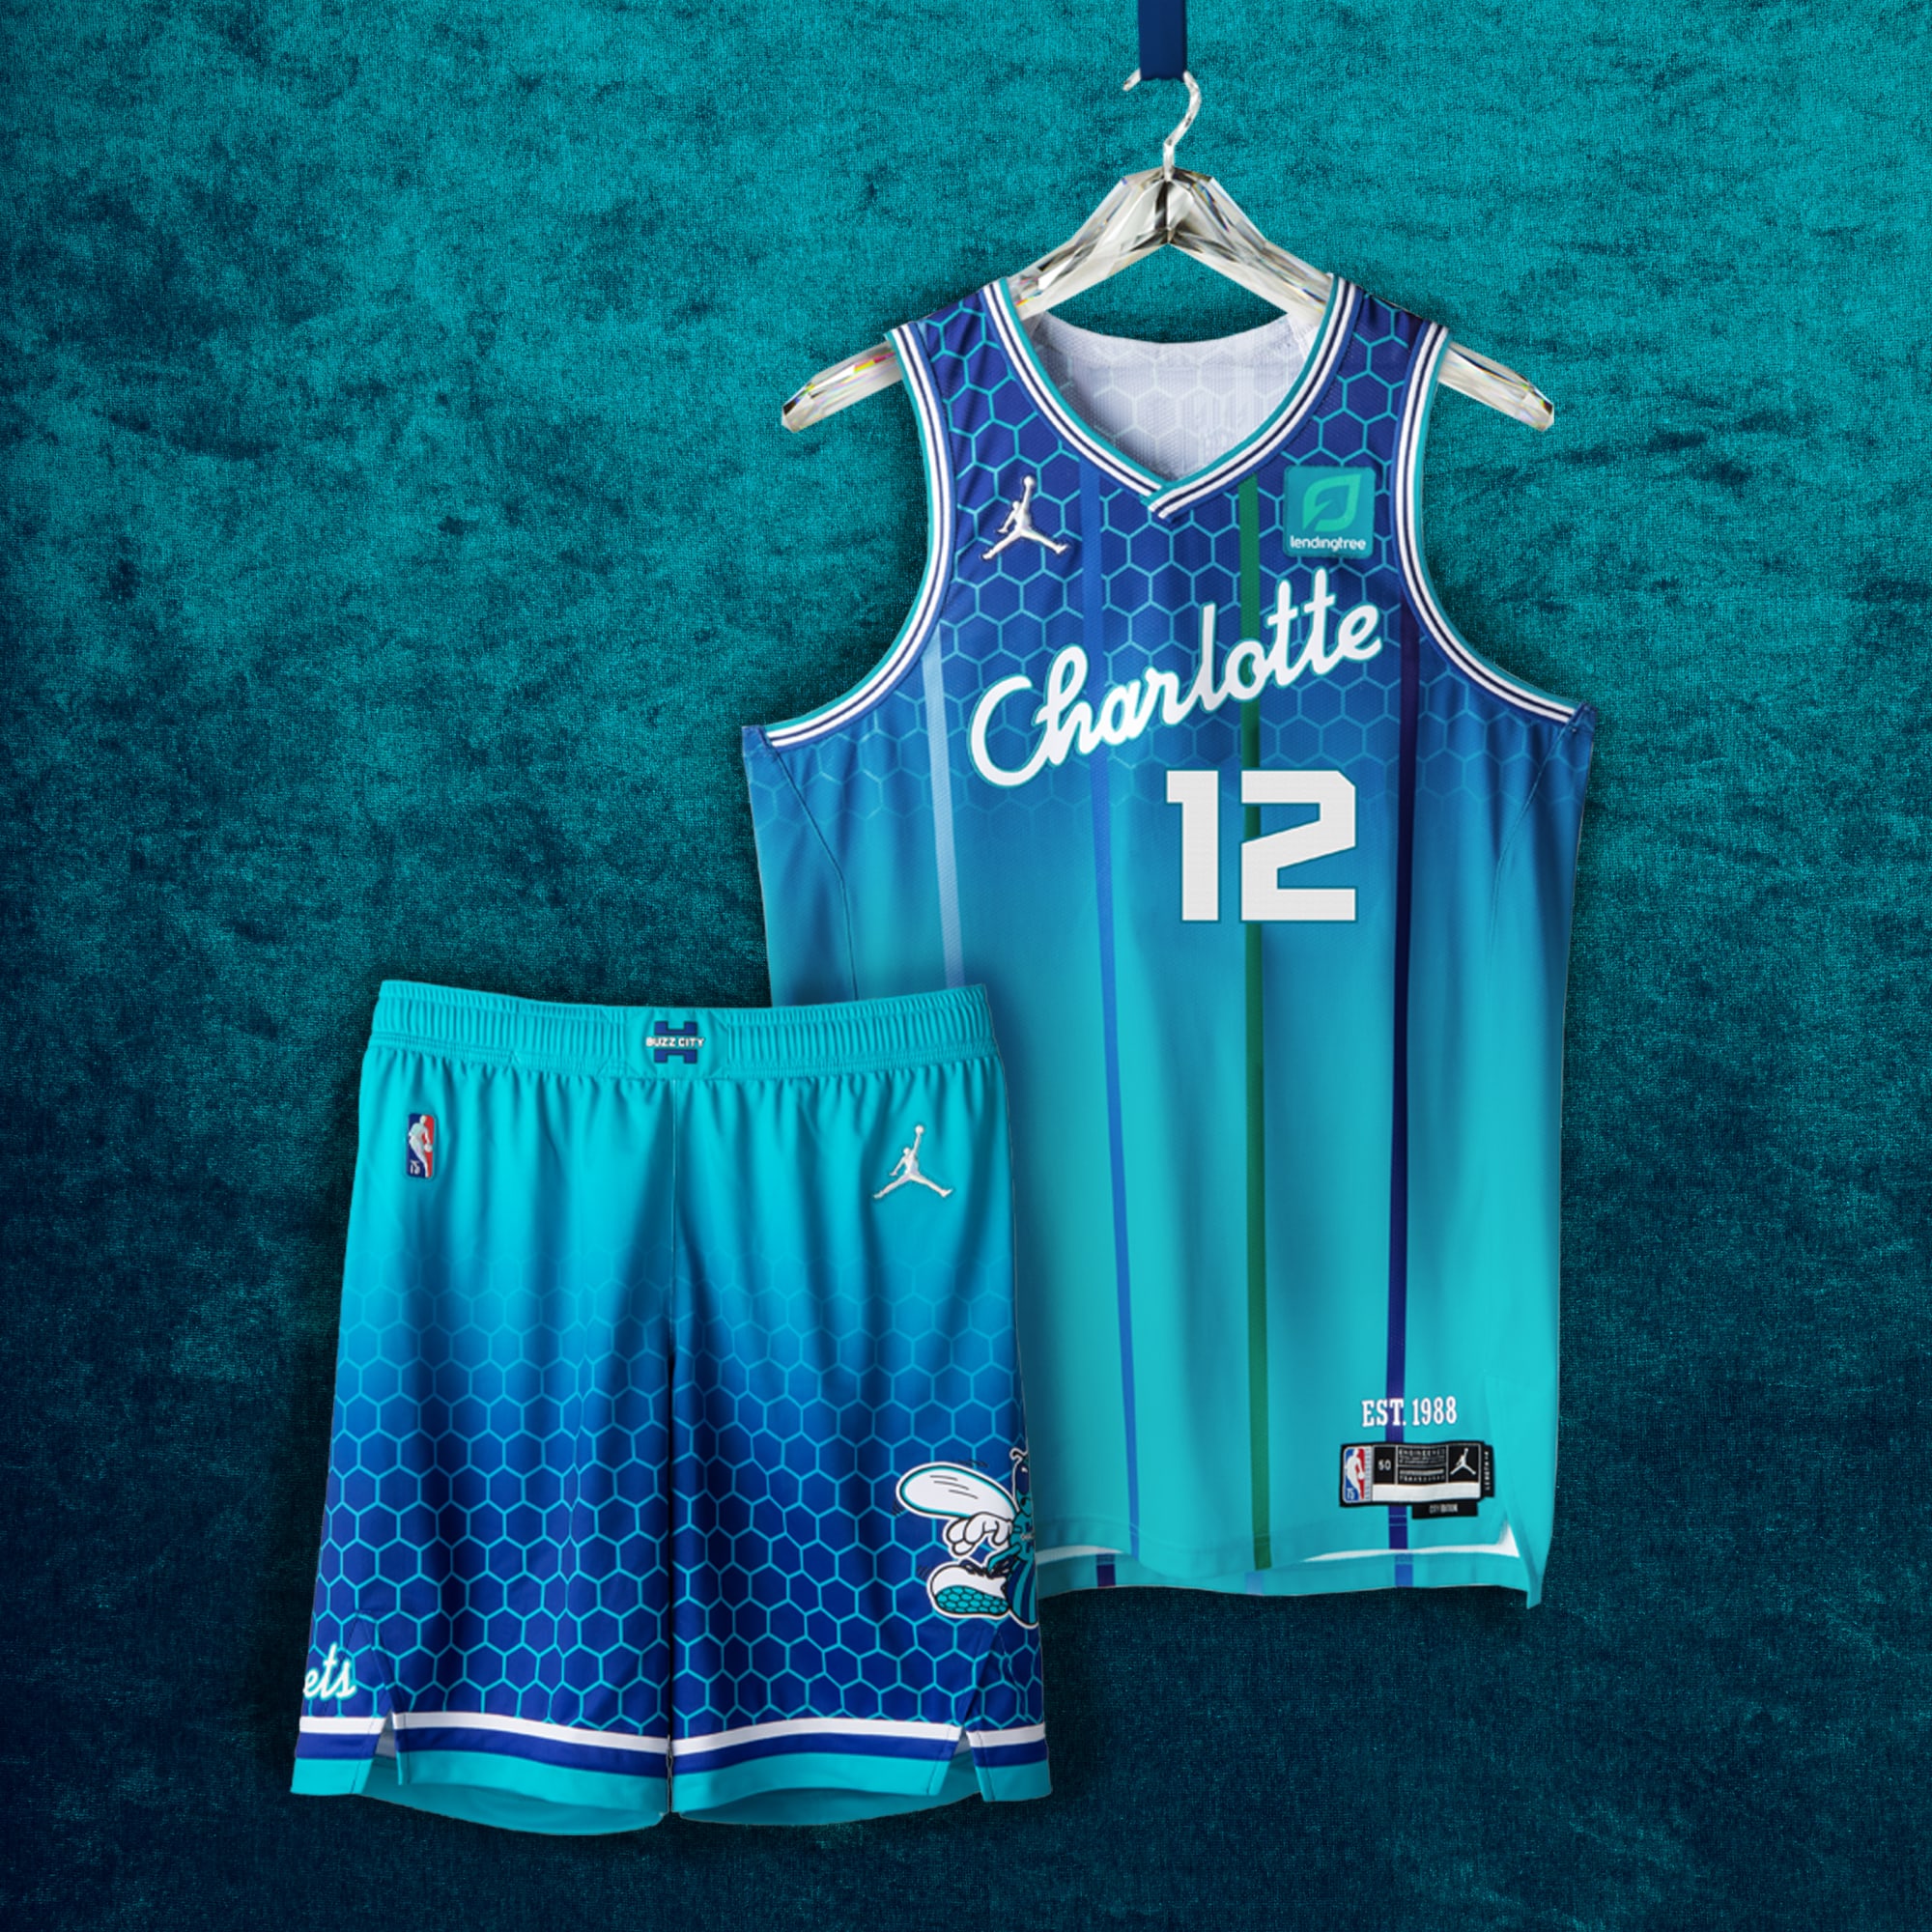 Order your Charlotte Nike City Edition gear today